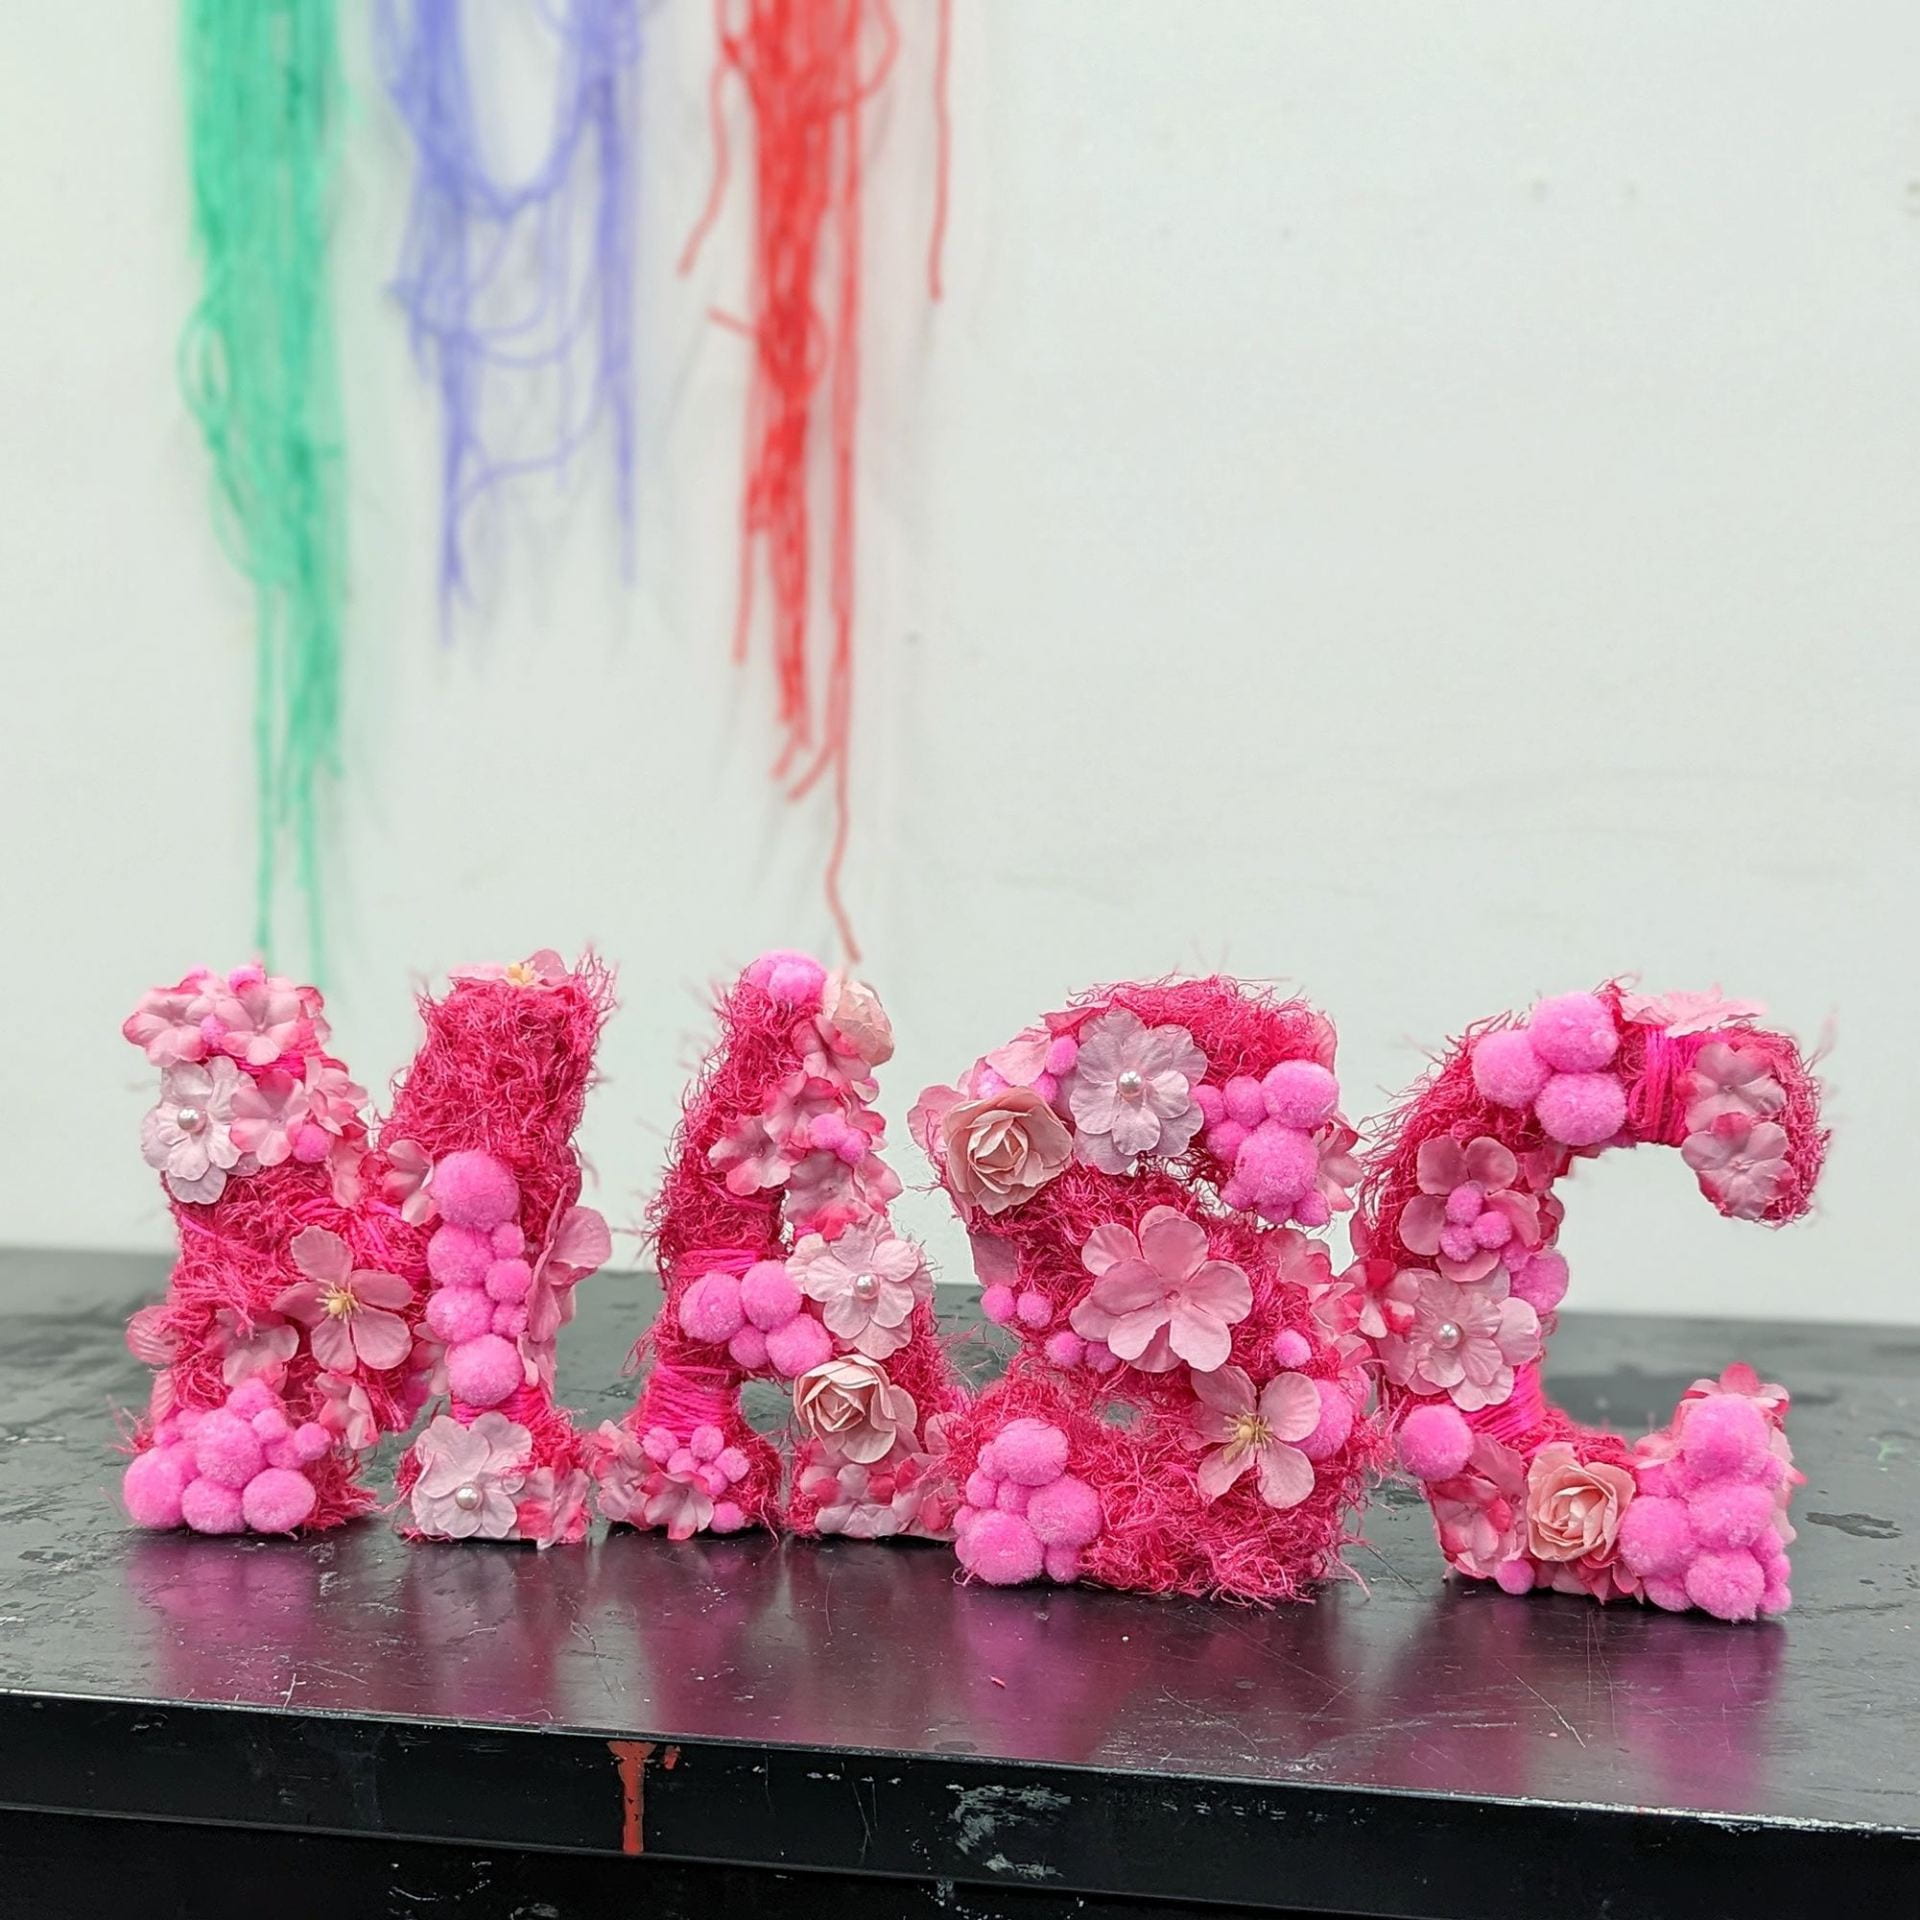 sculpture of the word MASC covered in pink flowers and pom-poms